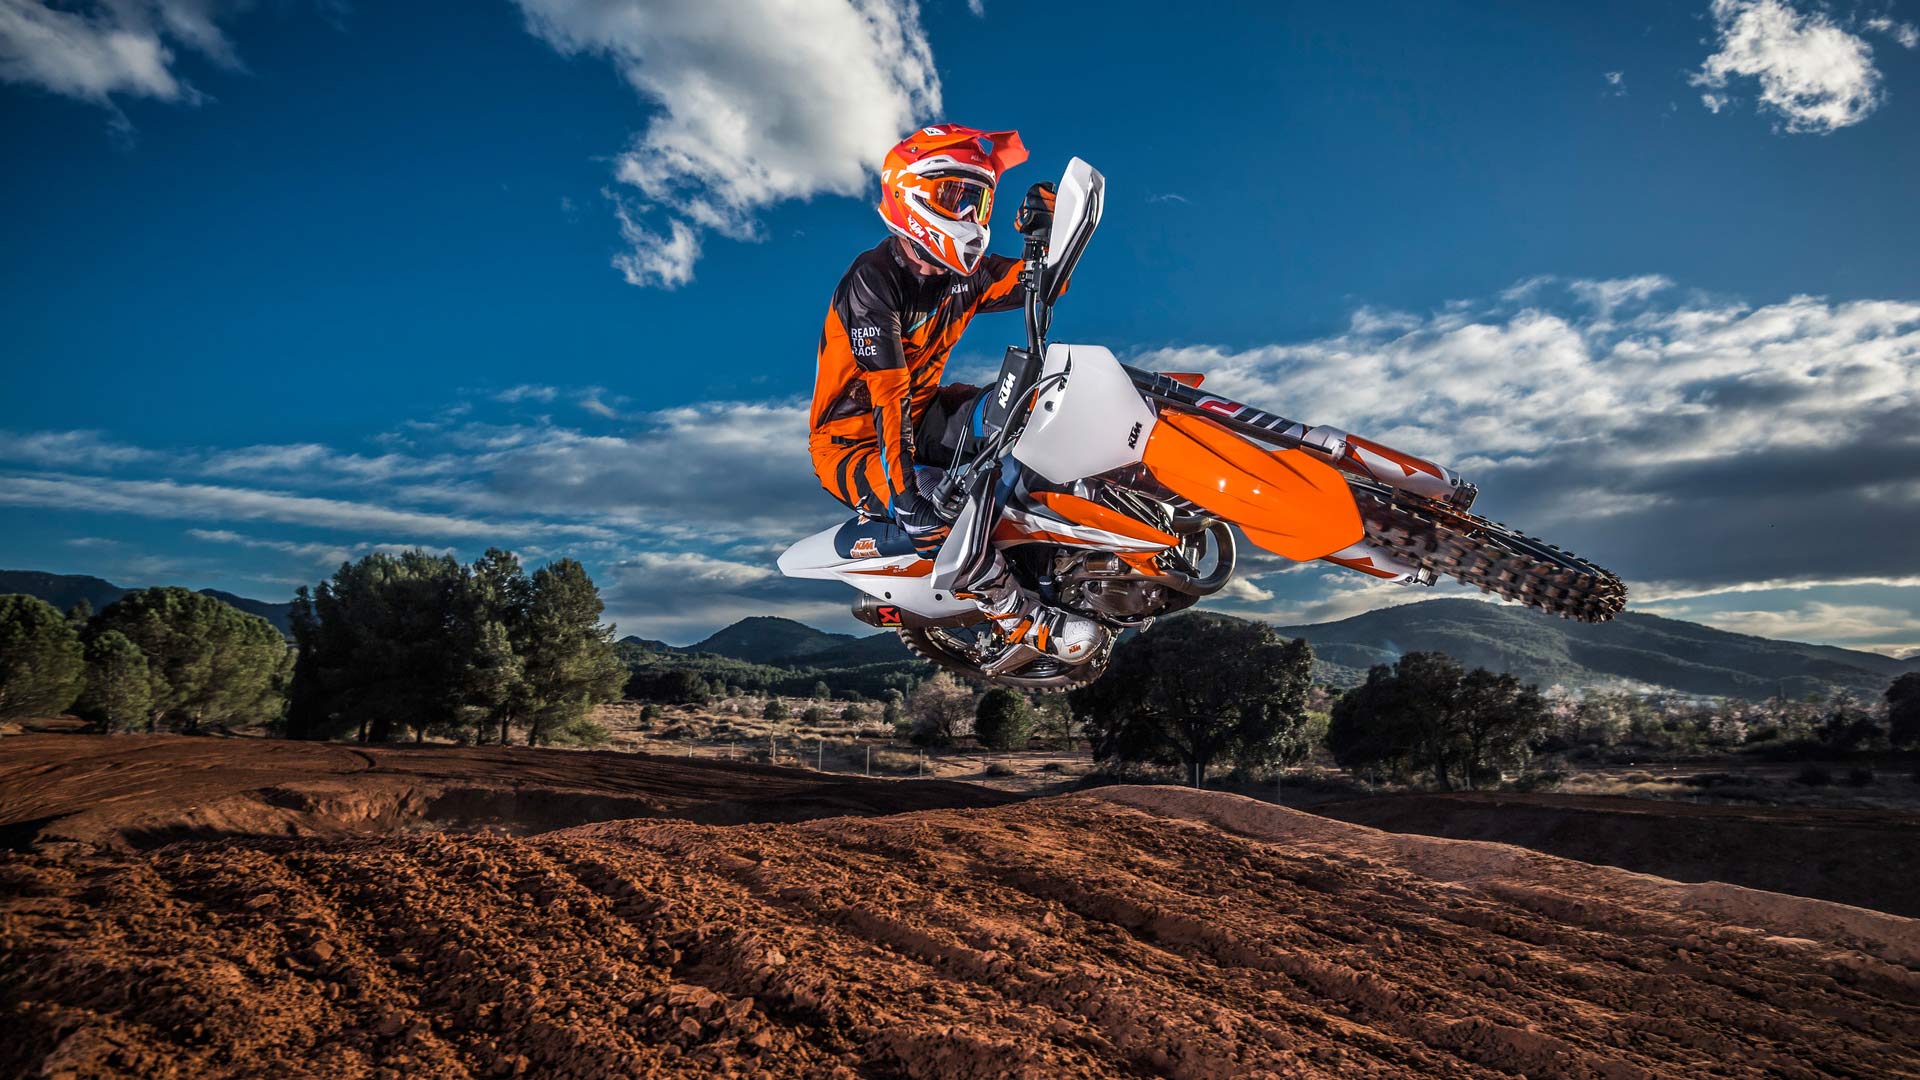 KTM Models available at Legends Powersports - Brockway | PA.